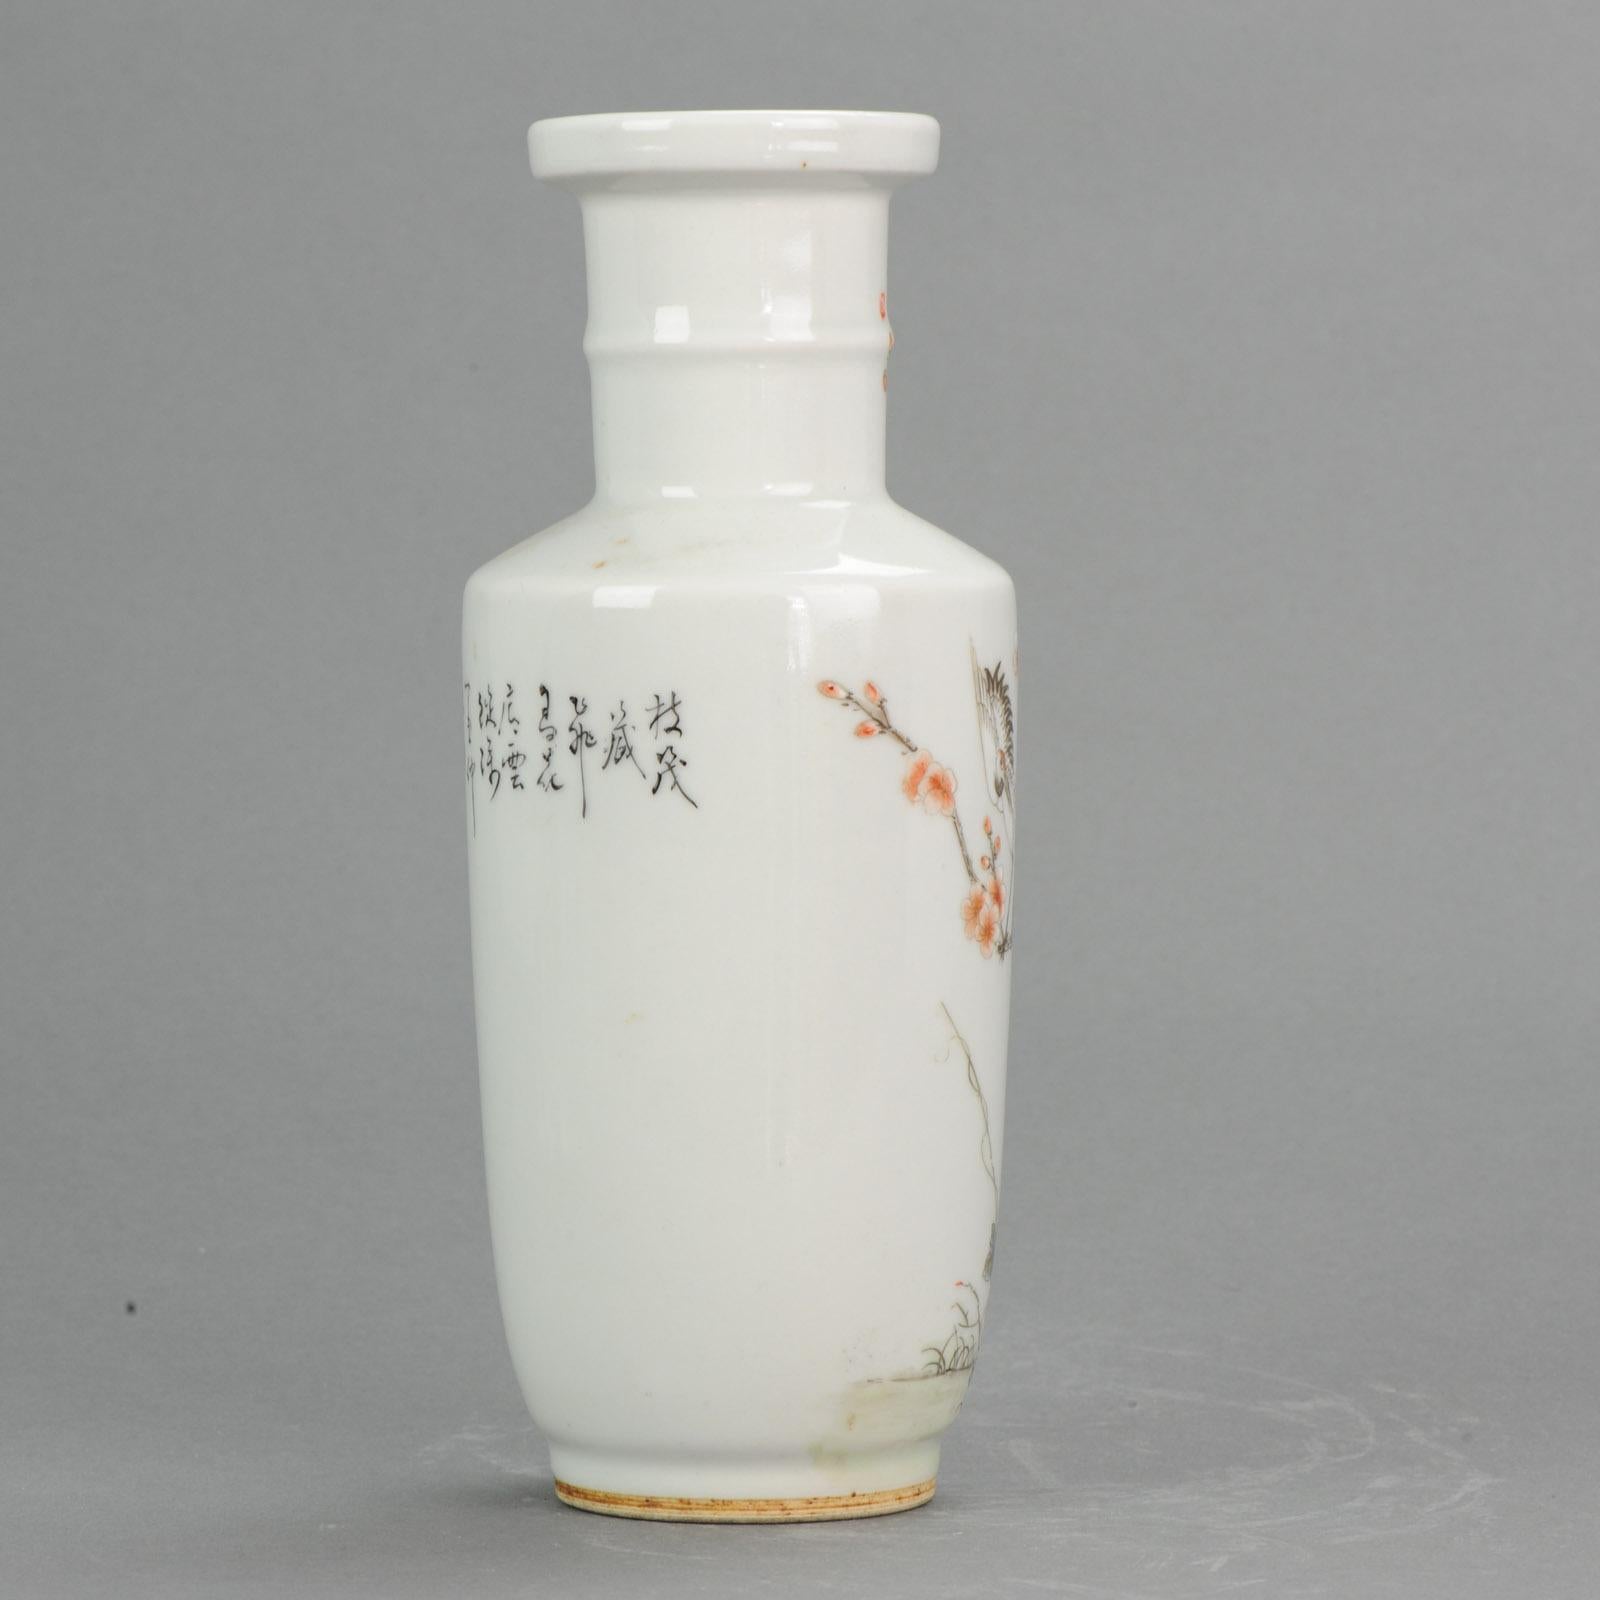 Lovely 20th Century PRoC Chinese Porcelain Vase With birds and Calligraphy 3